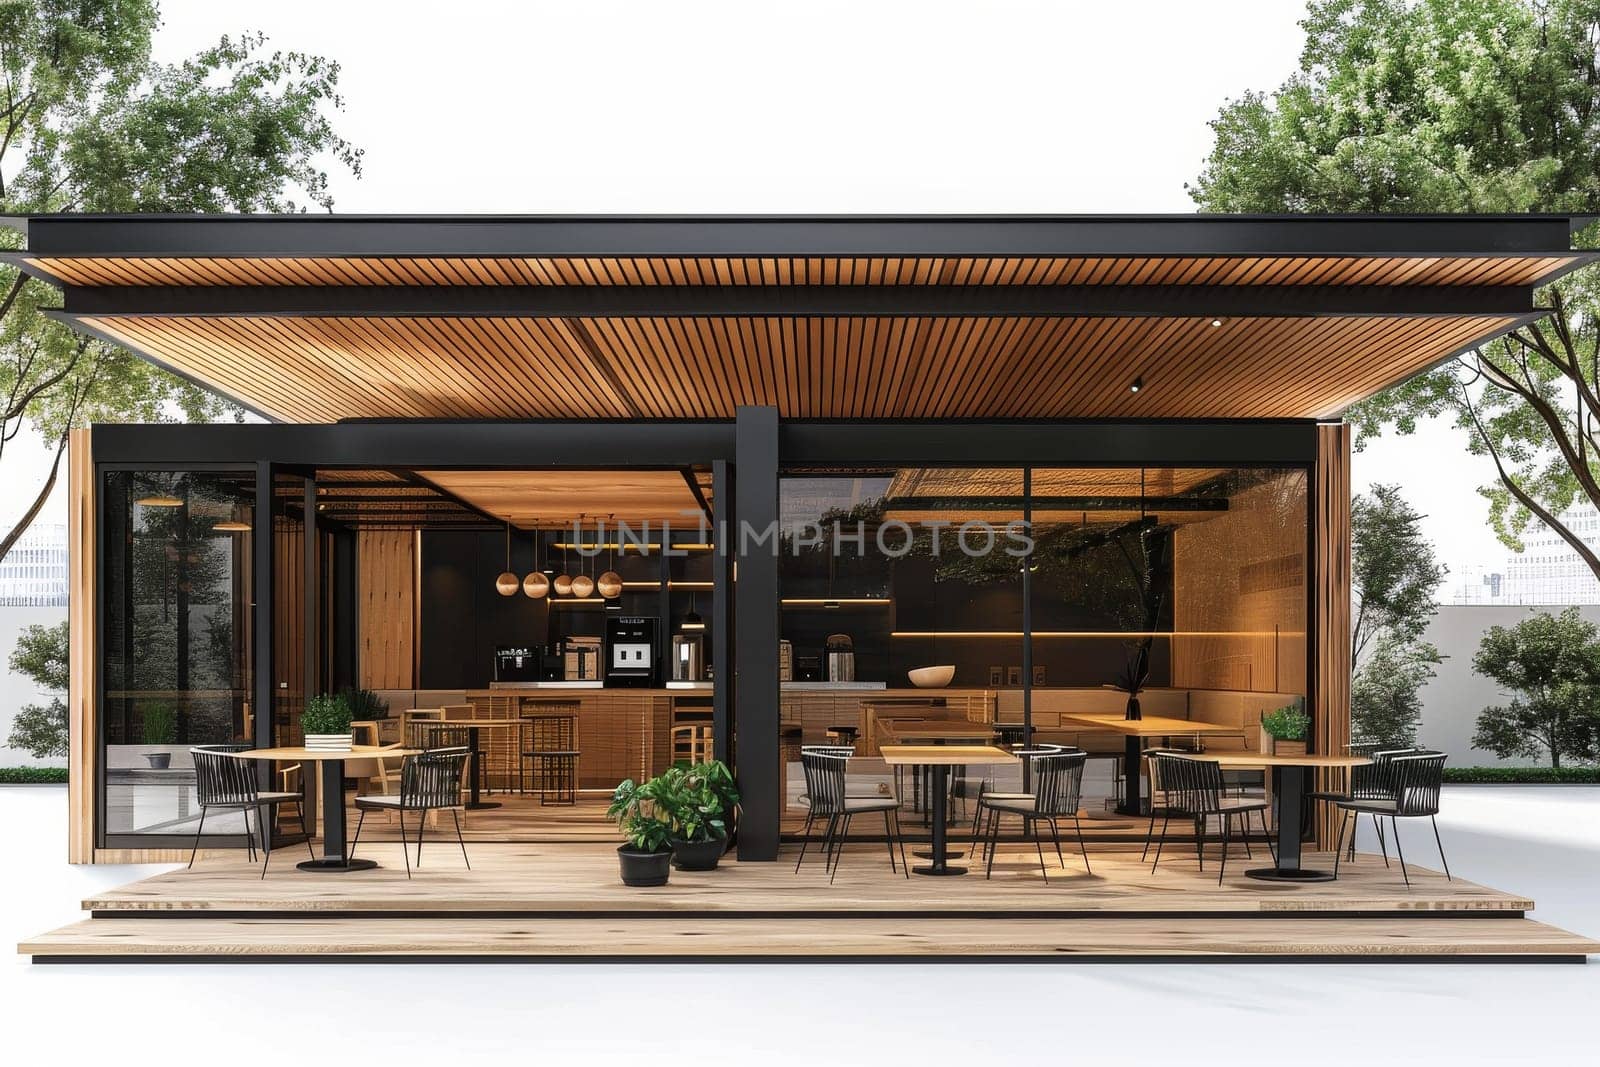 A small, modern building with a glass roof and wooden floors. The building has a restaurant inside and a patio area